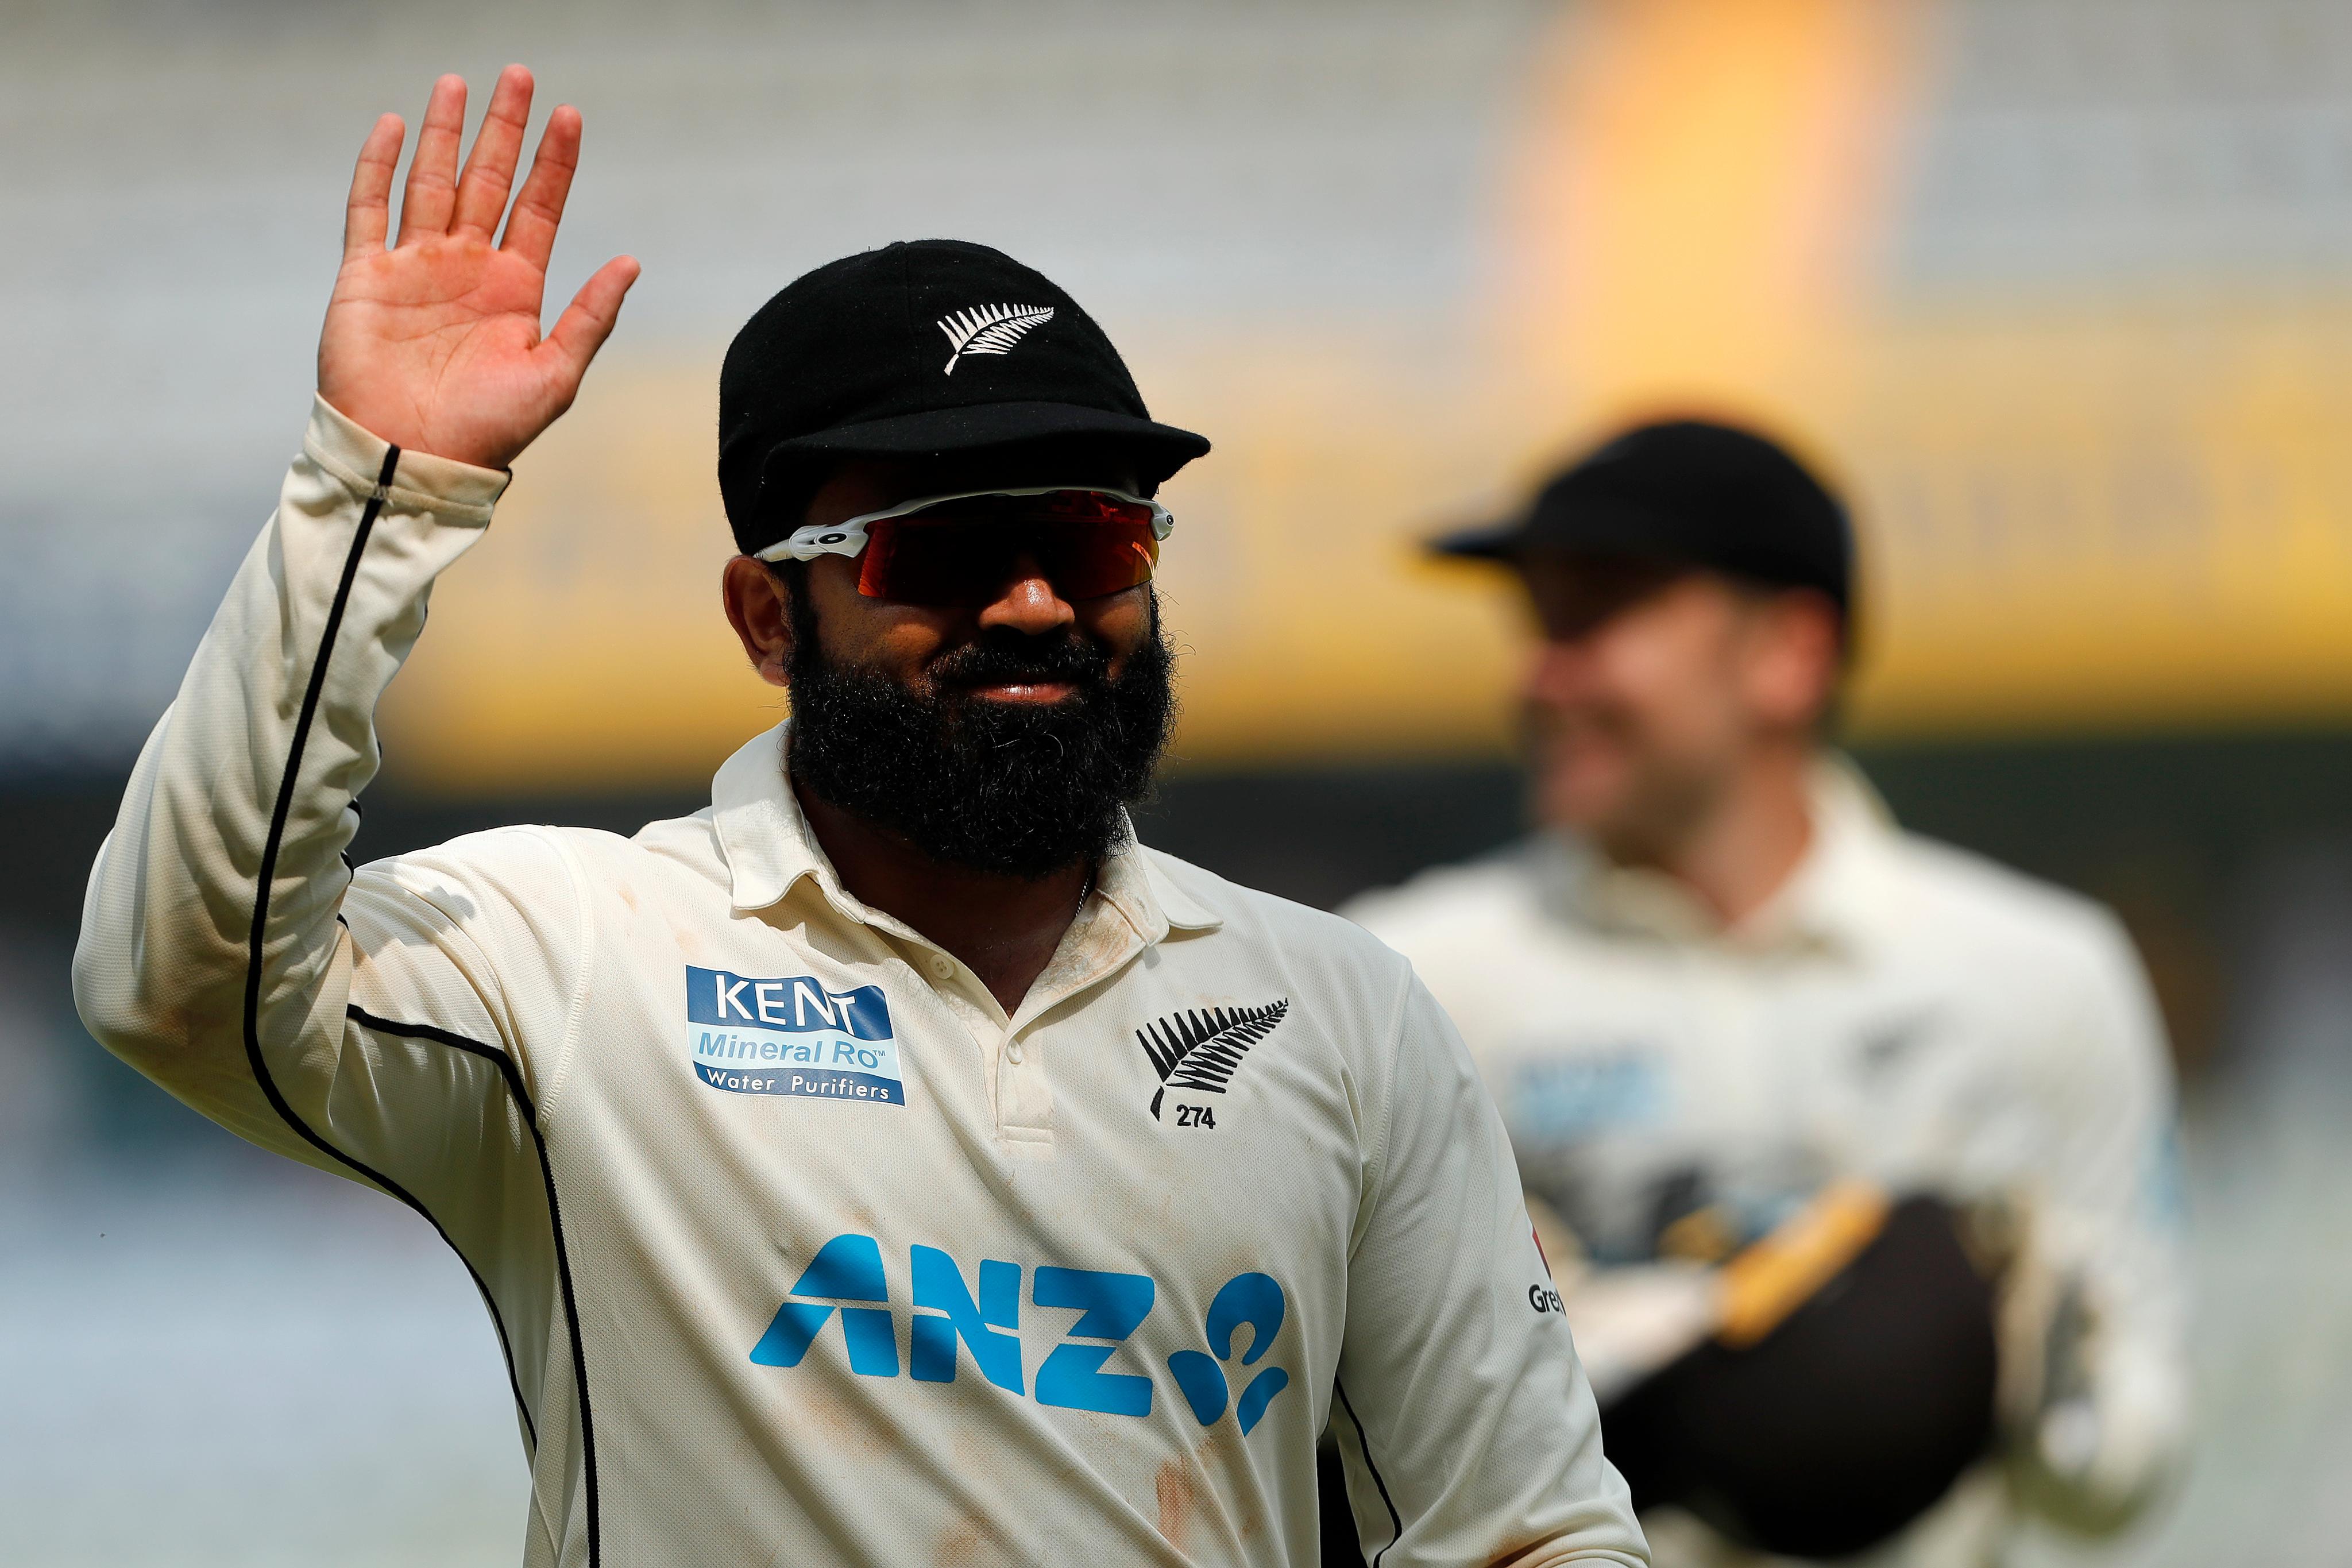 New Zealand’s spinner Ajaz Patel bags  10 wickets in an innings